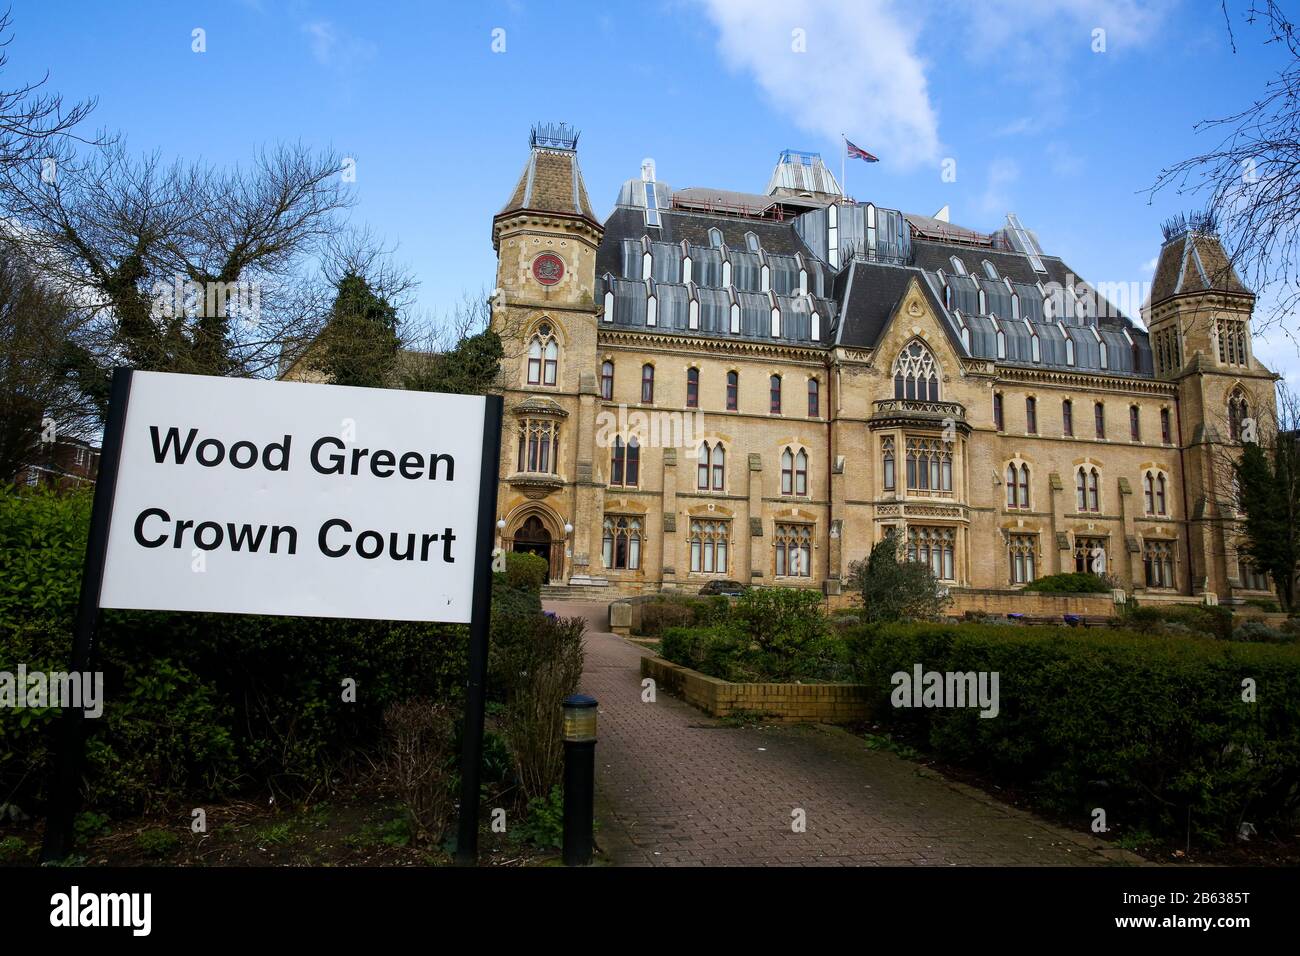 An exterior view of Wood Green Crown Court in north London, UK. Stock Photo